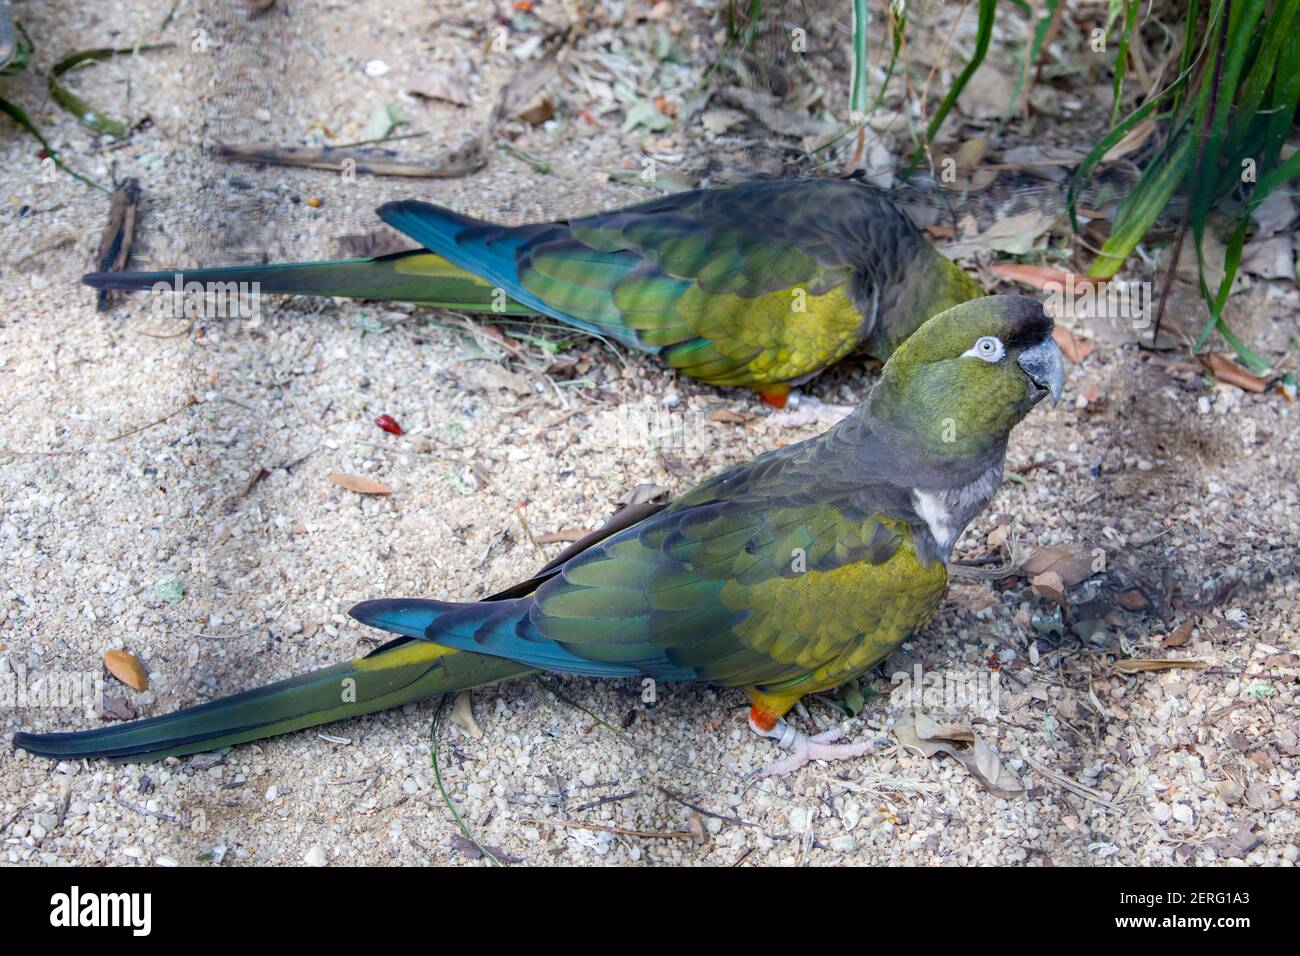 The burrowing parrot (Cyanoliseus patagonus) is a bird species in the parrot family. It belongs to the smaller long-tailed Arinae. Stock Photo